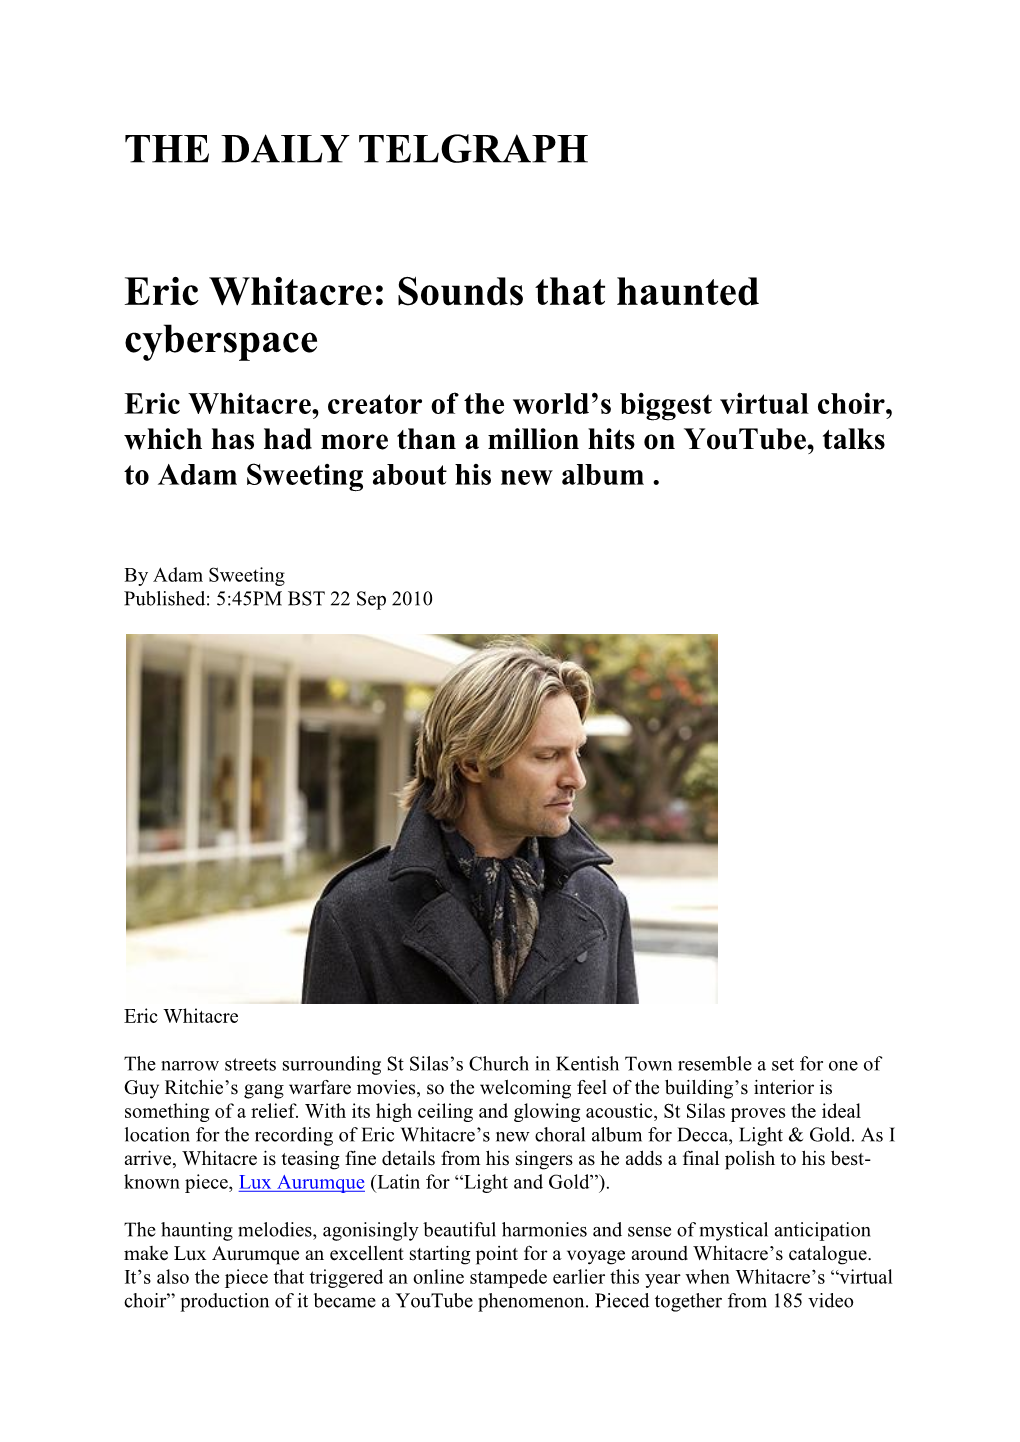 THE DAILY TELGRAPH Eric Whitacre: Sounds That Haunted Cyberspace